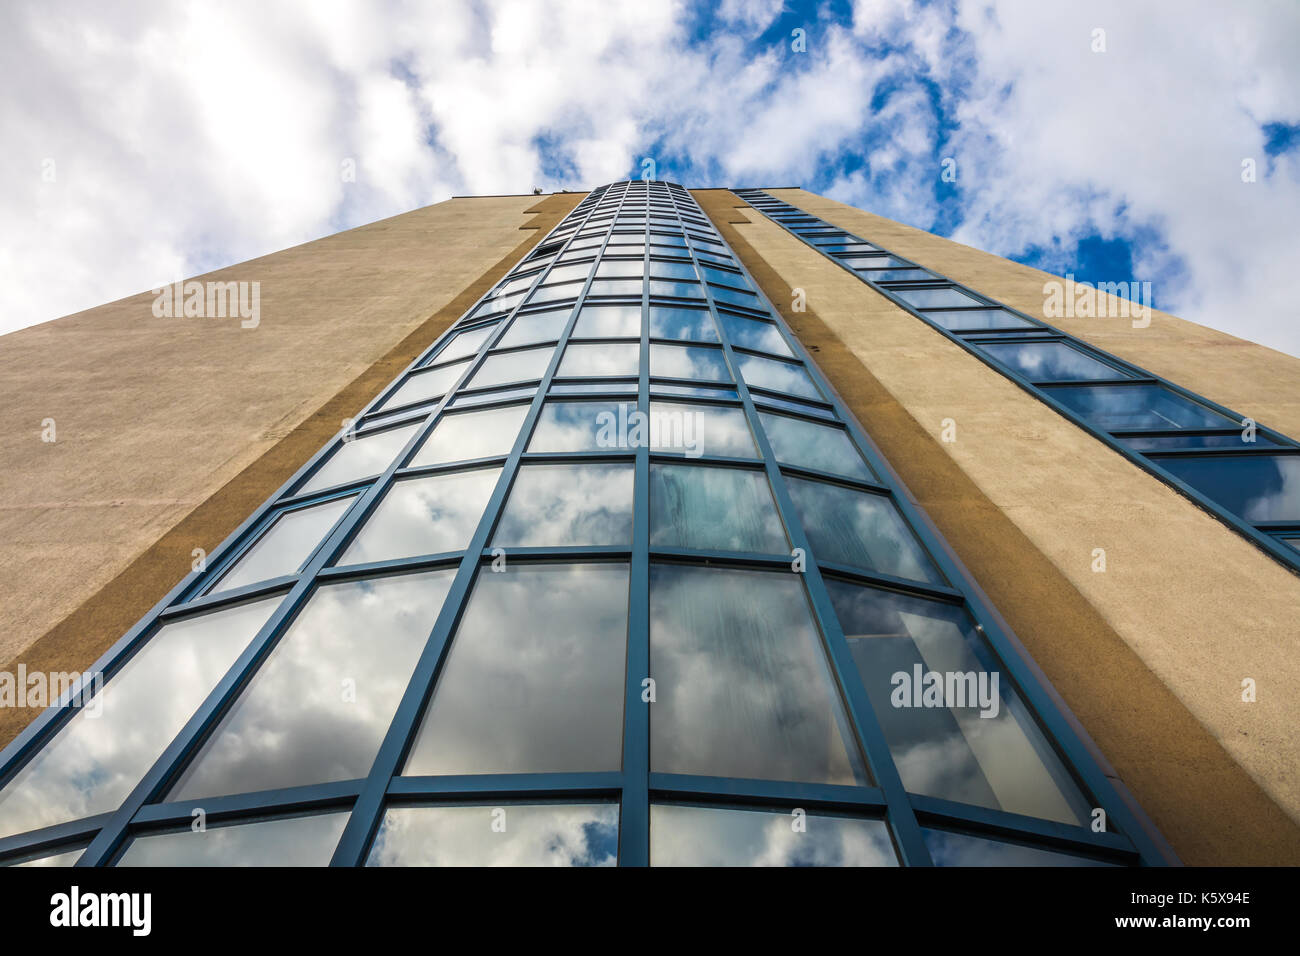 Bydgoszcz, Poland -  August 2017 : View of the tall office of a Bank Pocztowy on Jagiellonska street Stock Photo